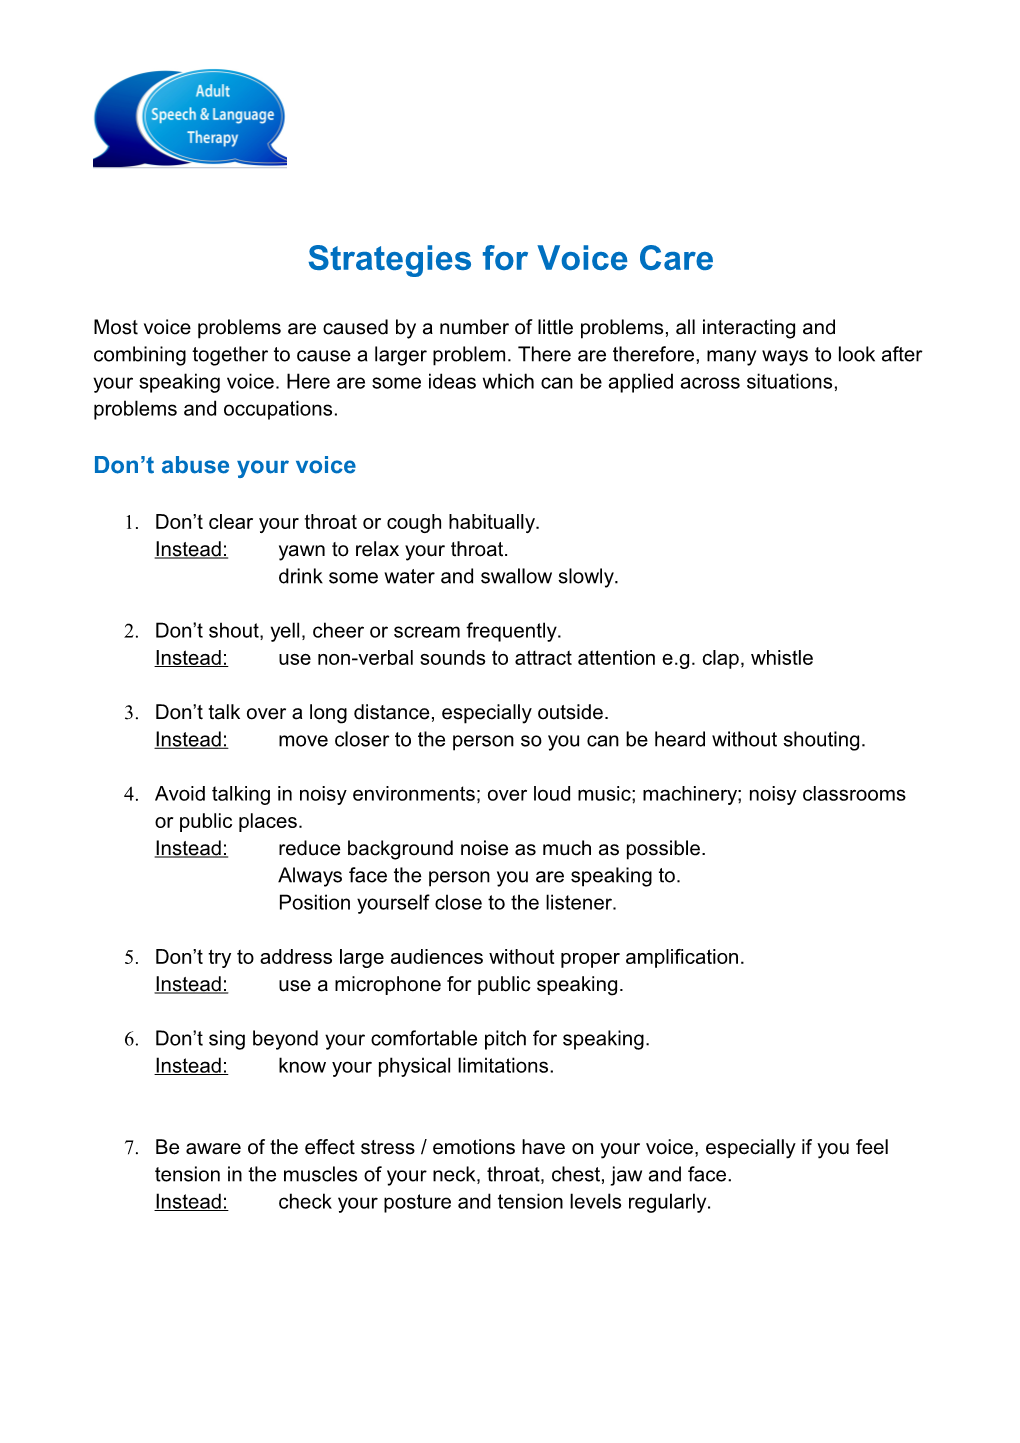 Strategies for Voice Care